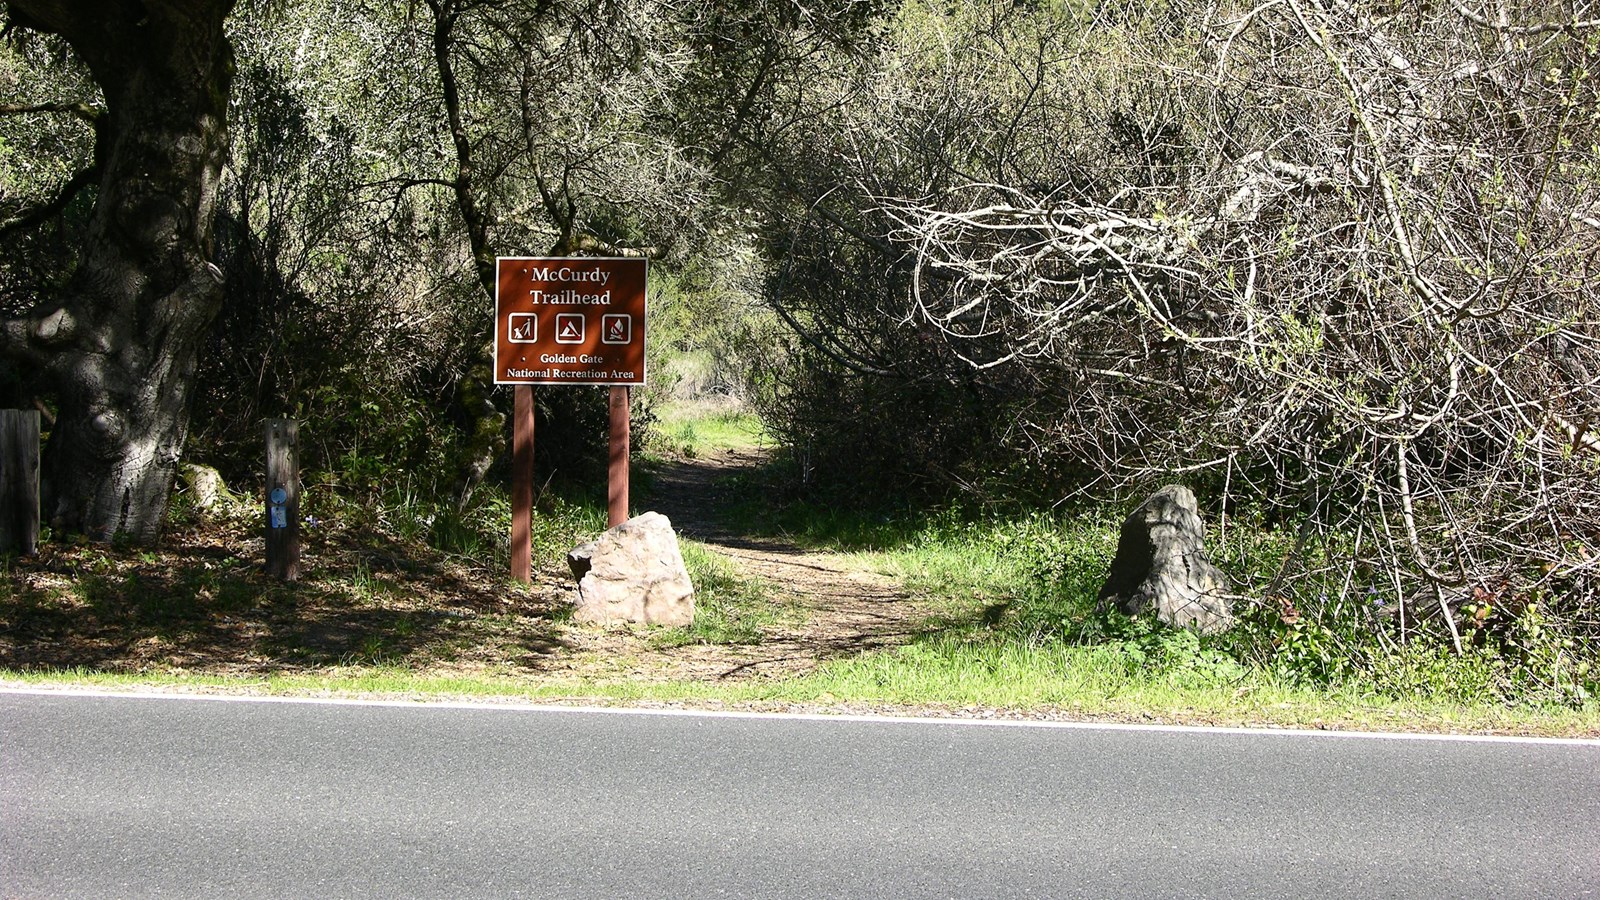 A medium-sized brown trailhead sign stands along the shoulder of a paved road under some trees.